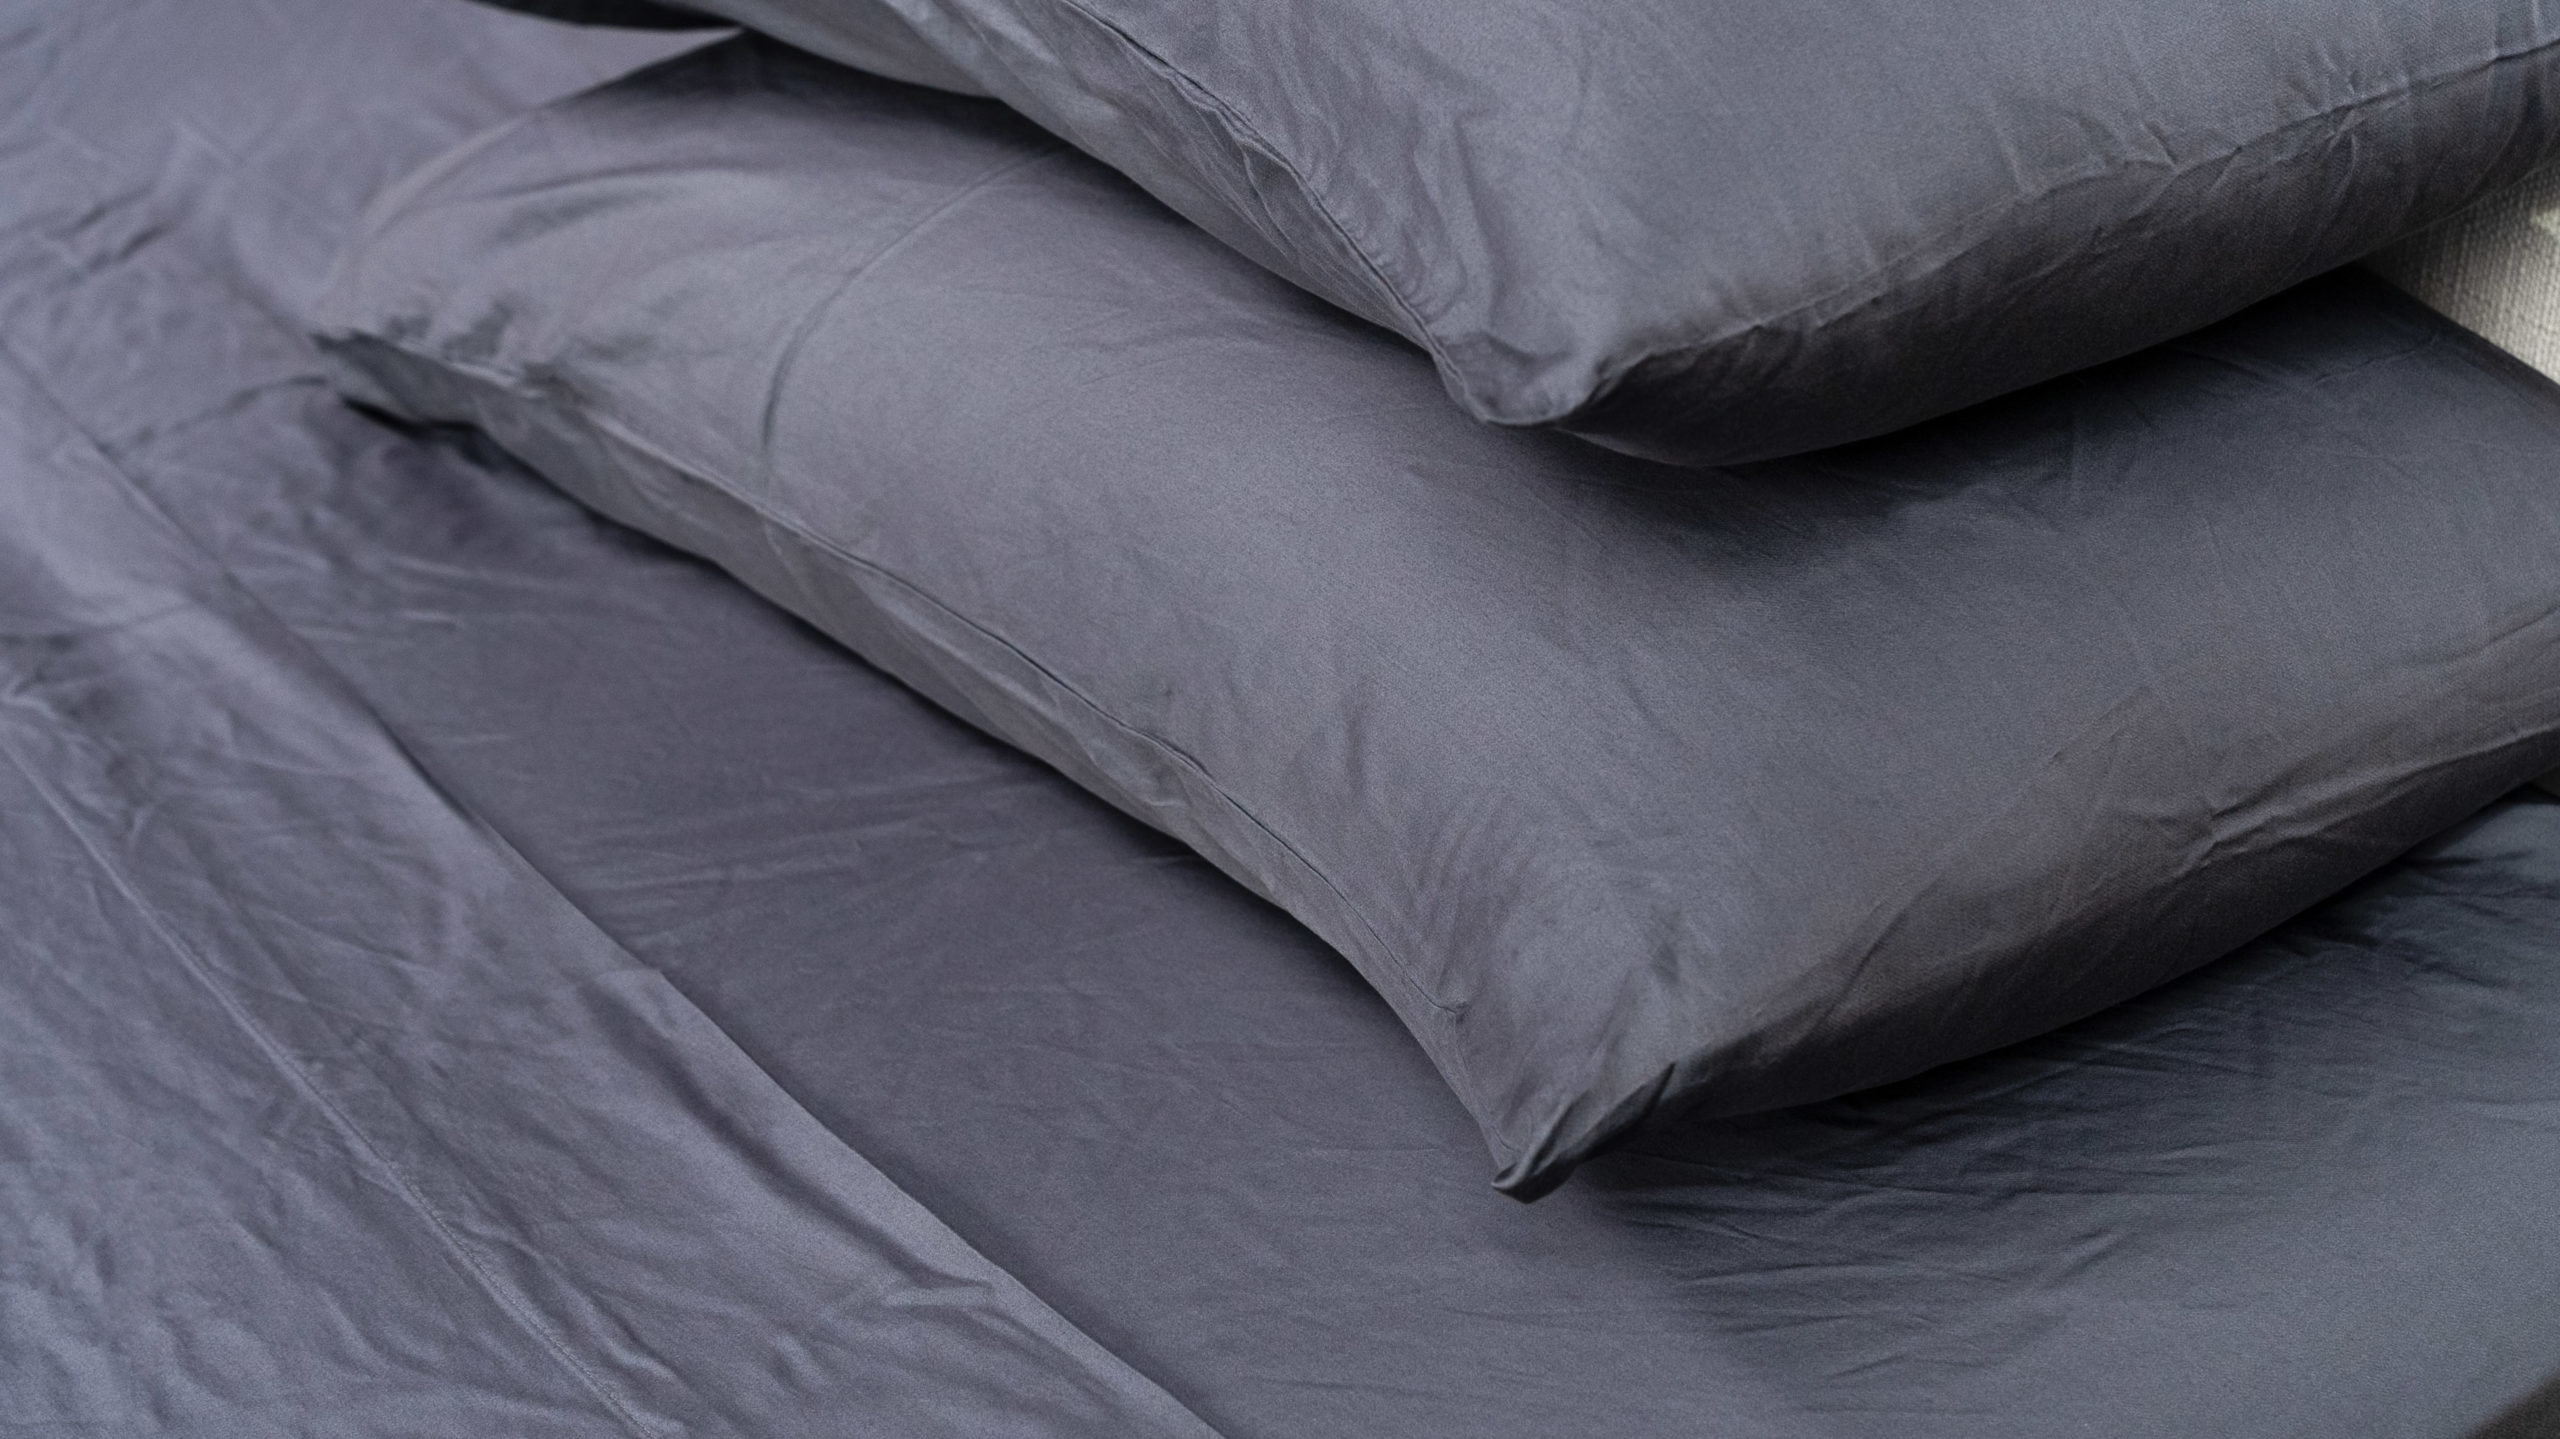 Up To 70% Off on Sheet Set Ultra Soft & Coolin